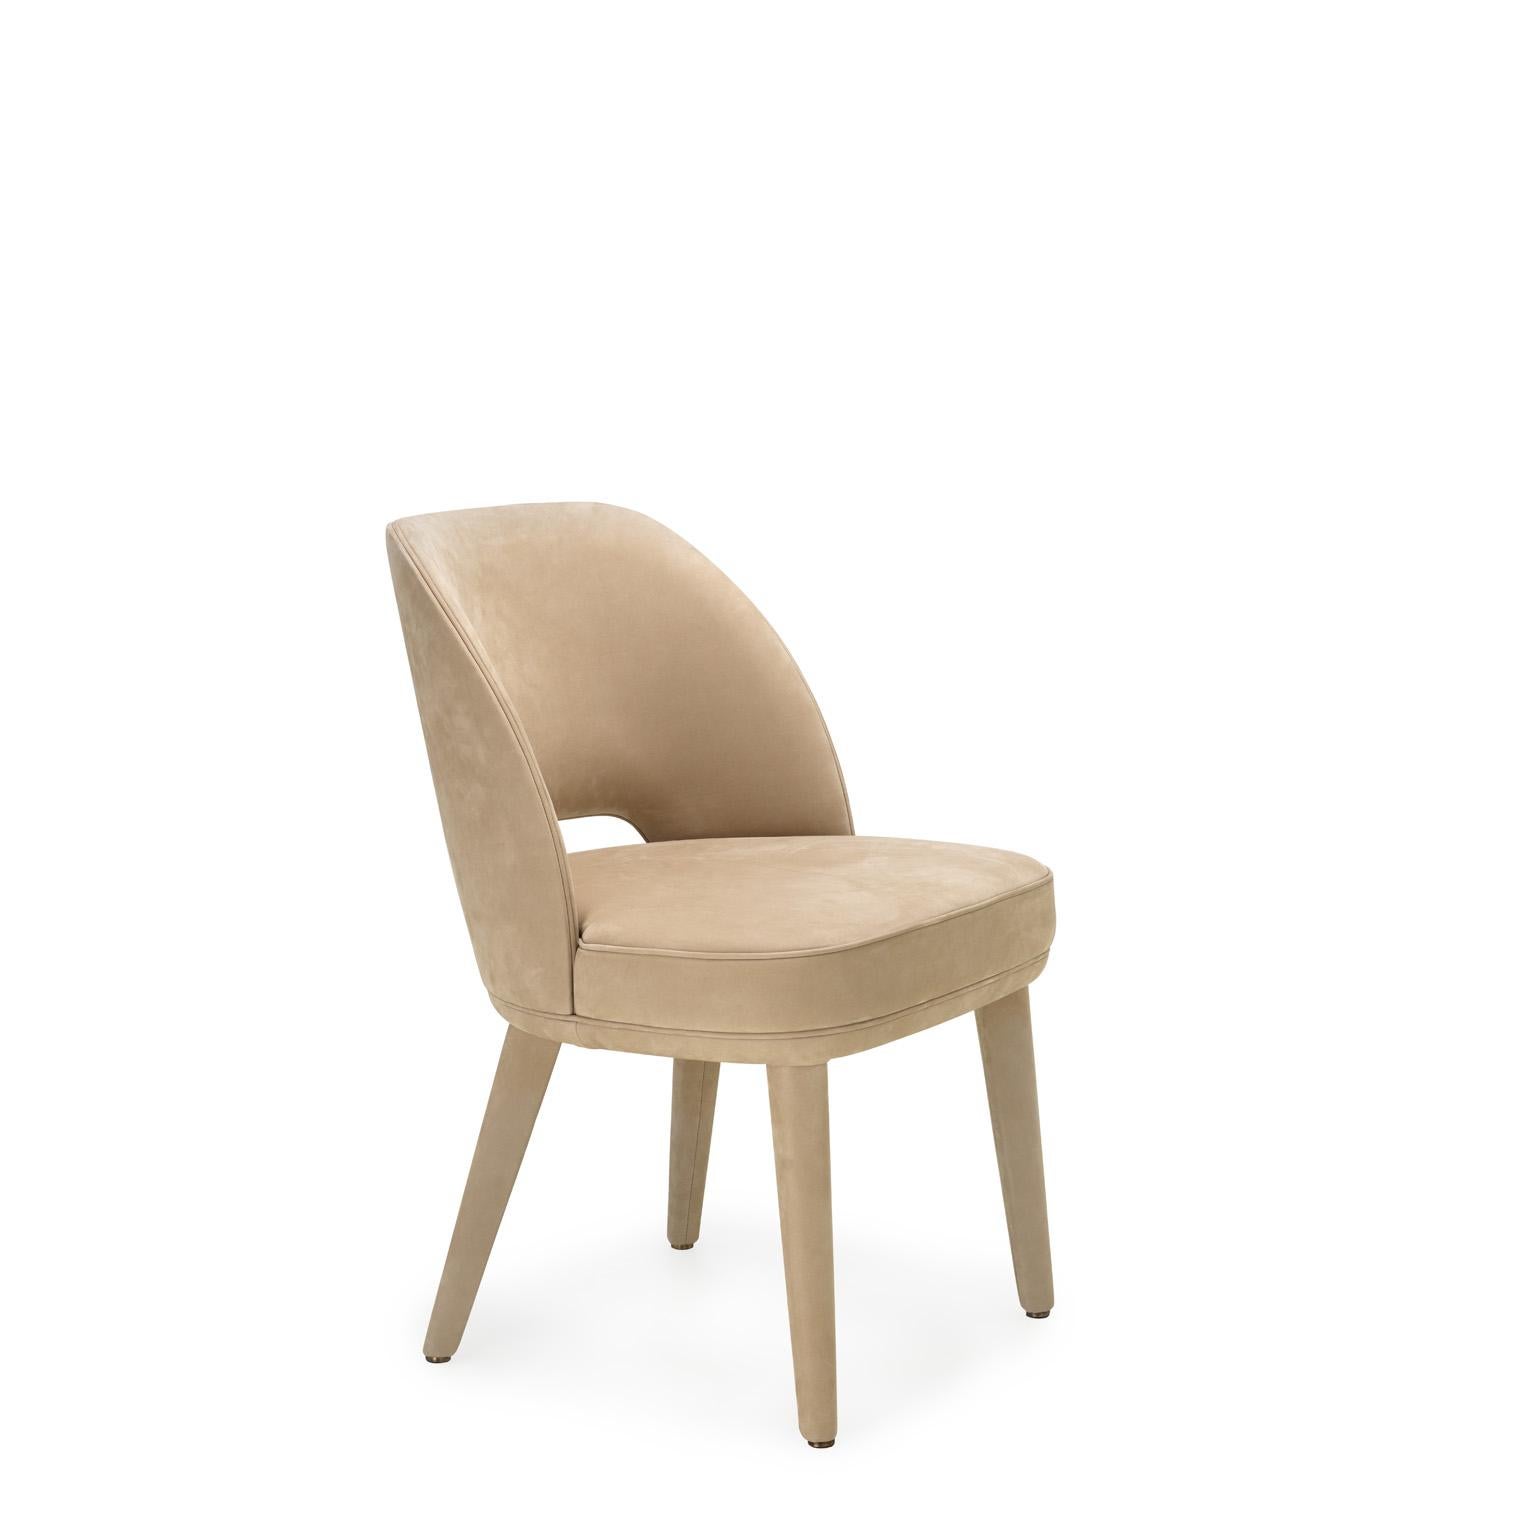 Penelope is a padded chair that features soft volumes and welcoming shapes. The fluid lines of the backrest and the lightness of the legs are enhanced by the covering in Carmen leather (cat. L), proposed in an elegant Conchiglia colour. A fine